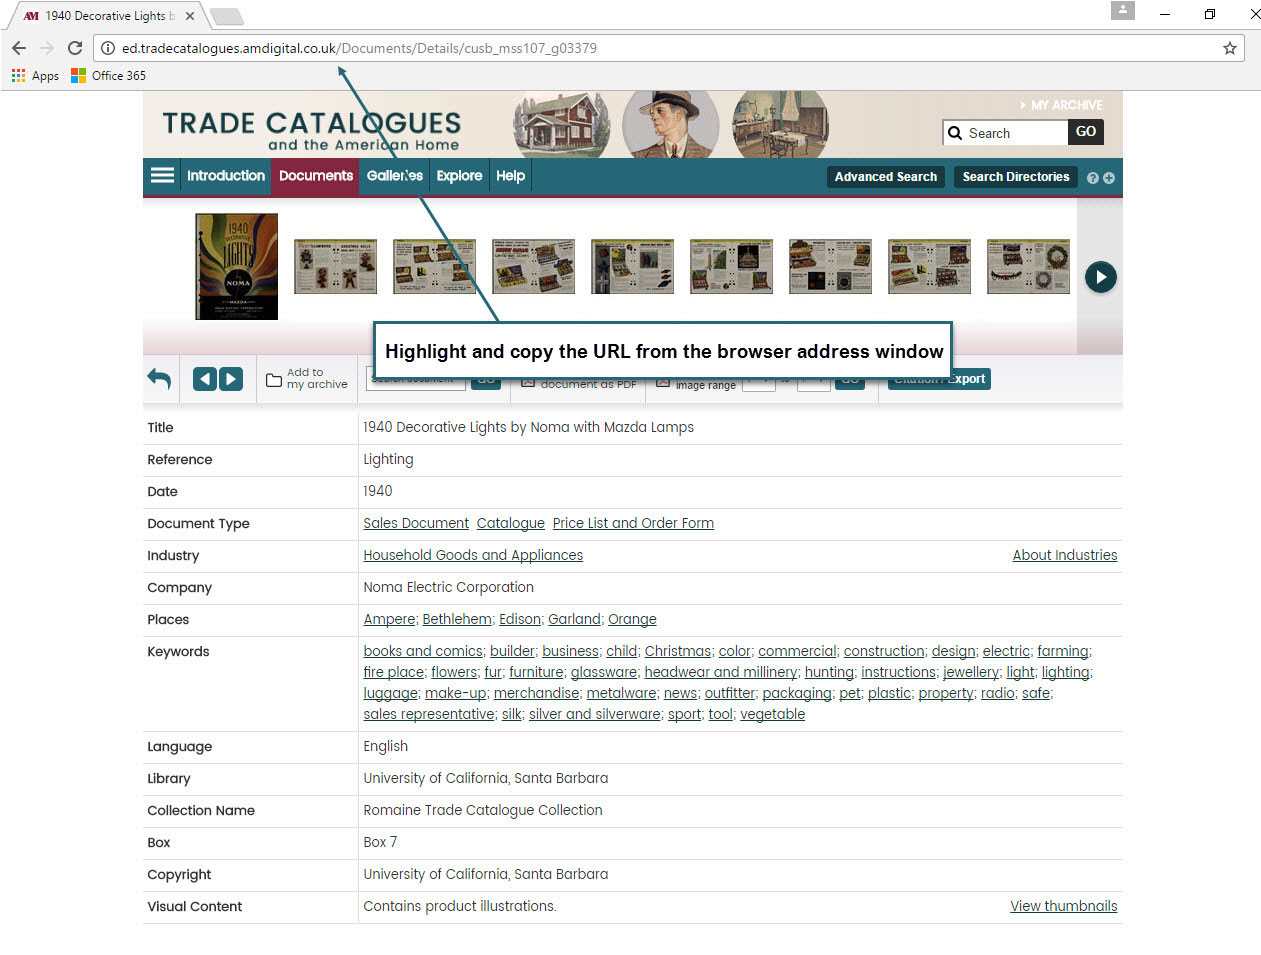 Screenshot showing a document details page and pointing out the static URL that users can direct students to.